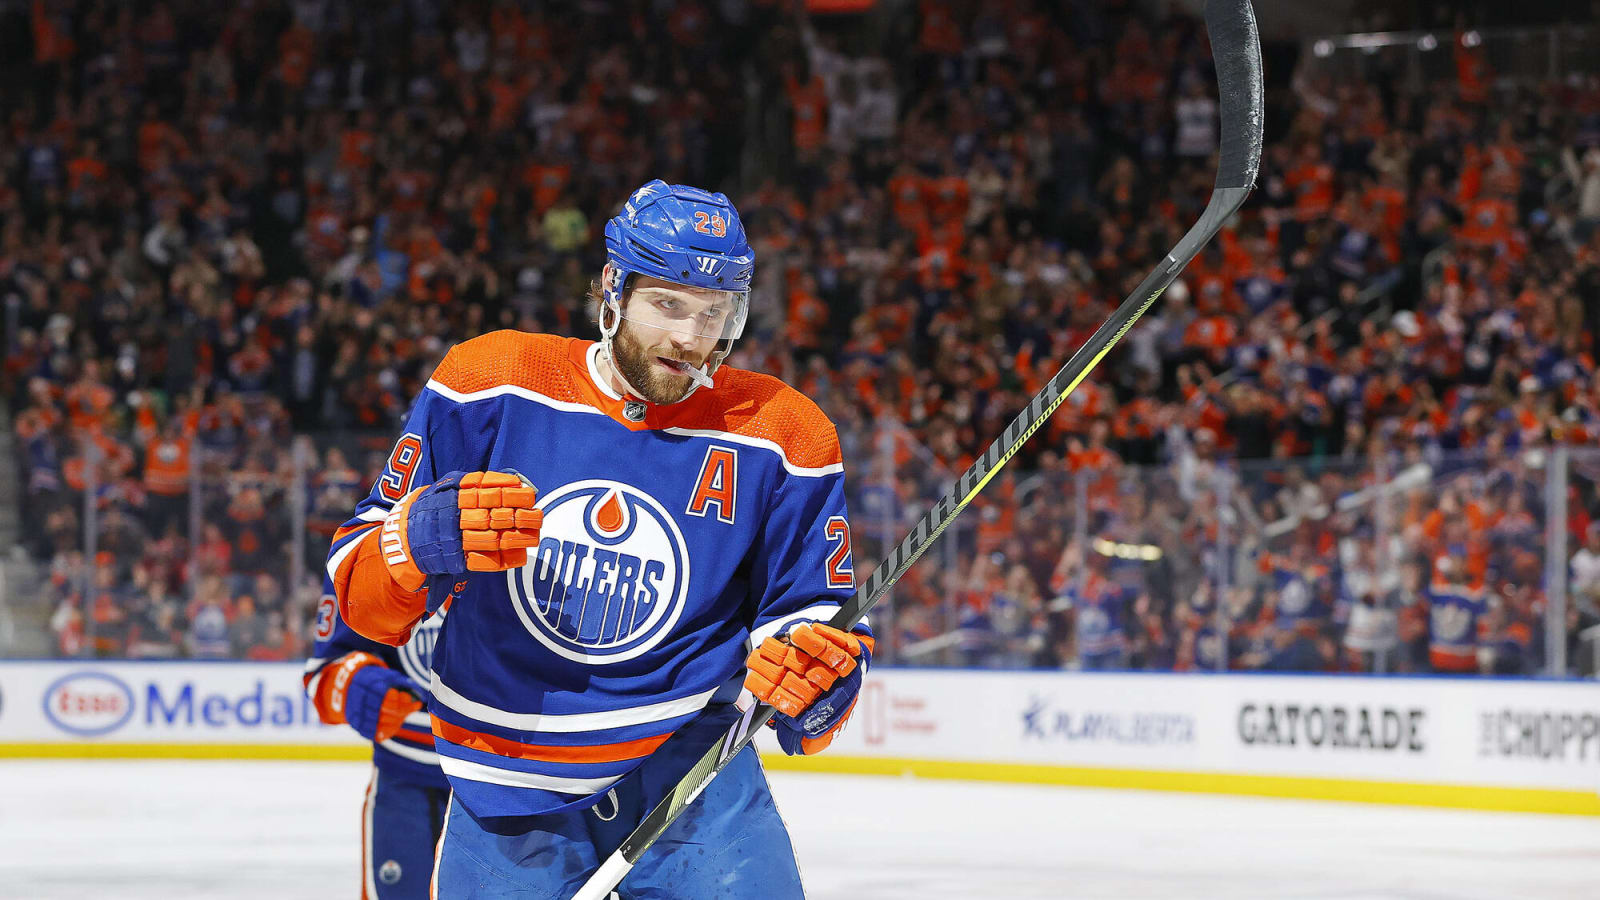 Oilers Have Effective 2nd Line With Draisaitl, Foegele, and McLeod